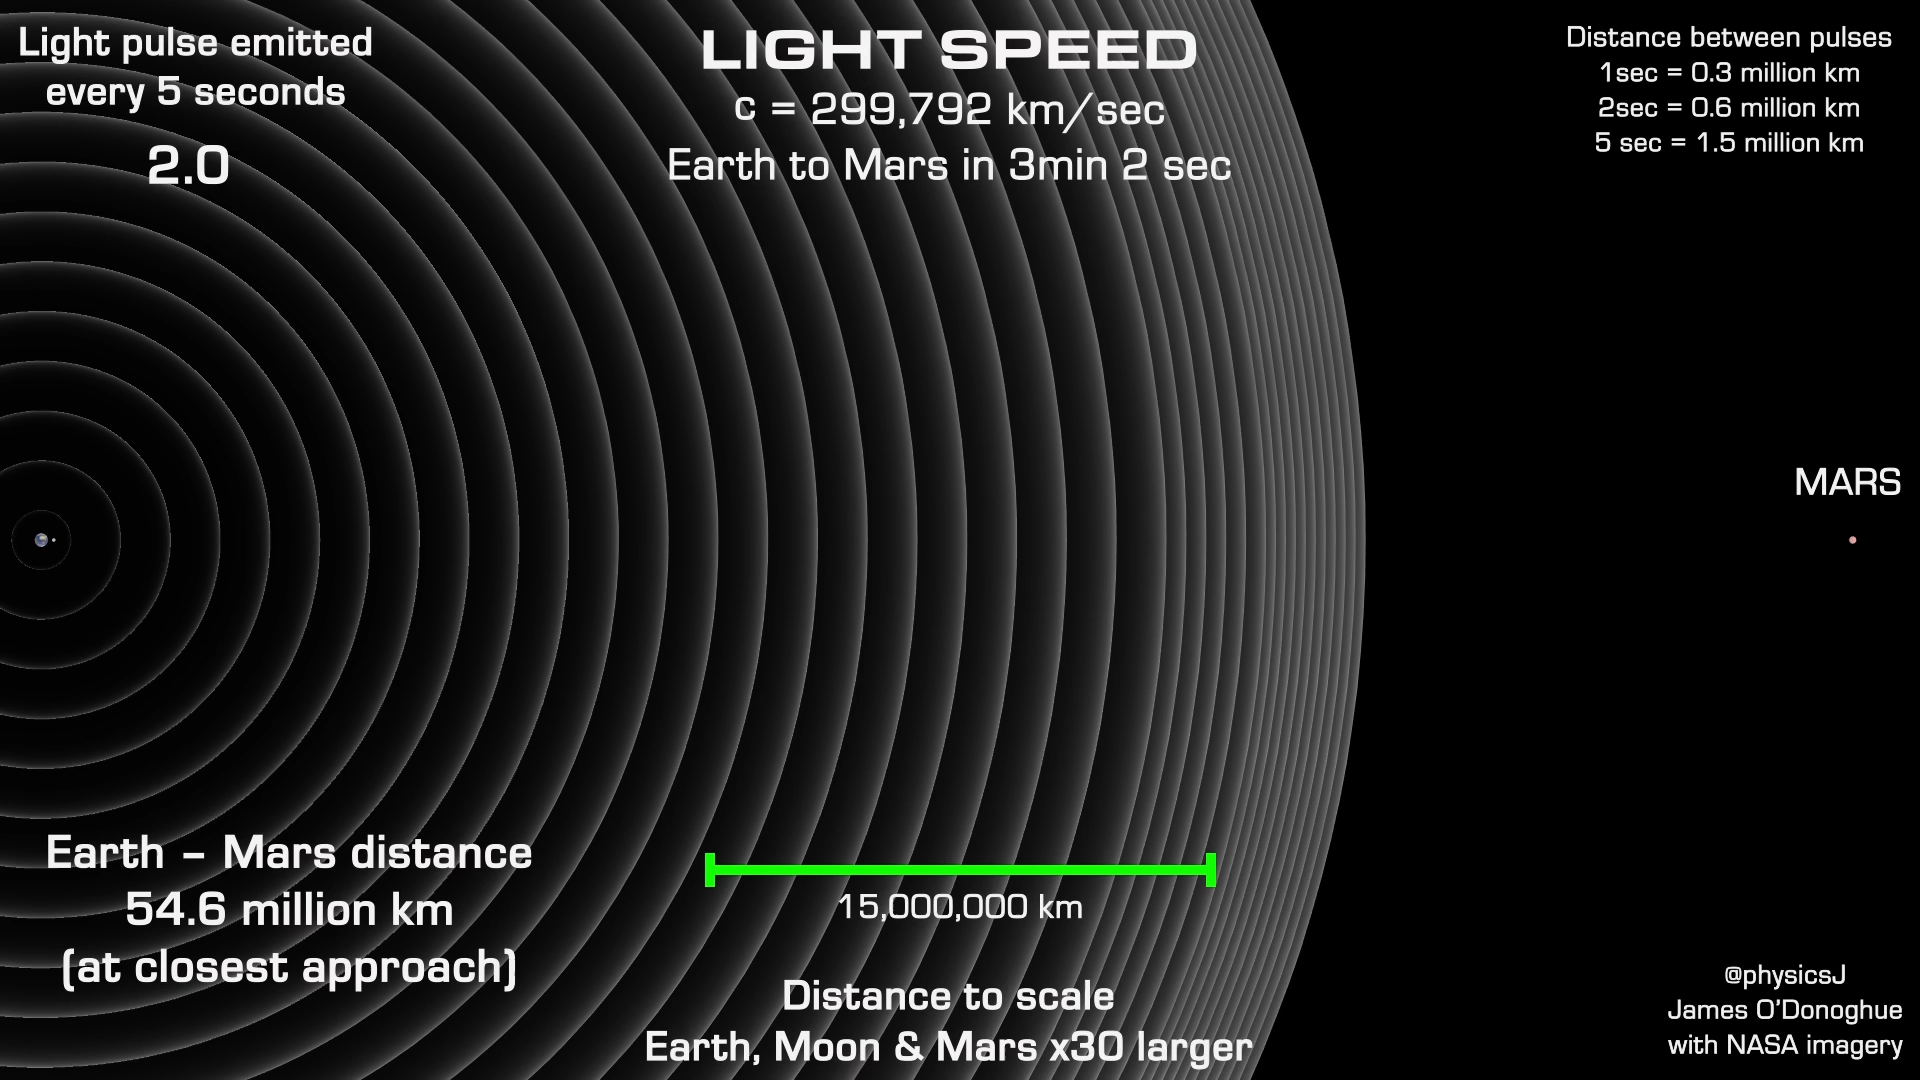 screenshot - Light pulse emitted every 5 seconds 2.0 Light Speed c 299,792 kmsec Earth to Mars in 3min 2 sec Distance between pulses. 1sec 0.3 million km 2sec 0.6 million km 5 sec 1.5 million km Mars Earth Mars distance 54.6 million km at closest approach